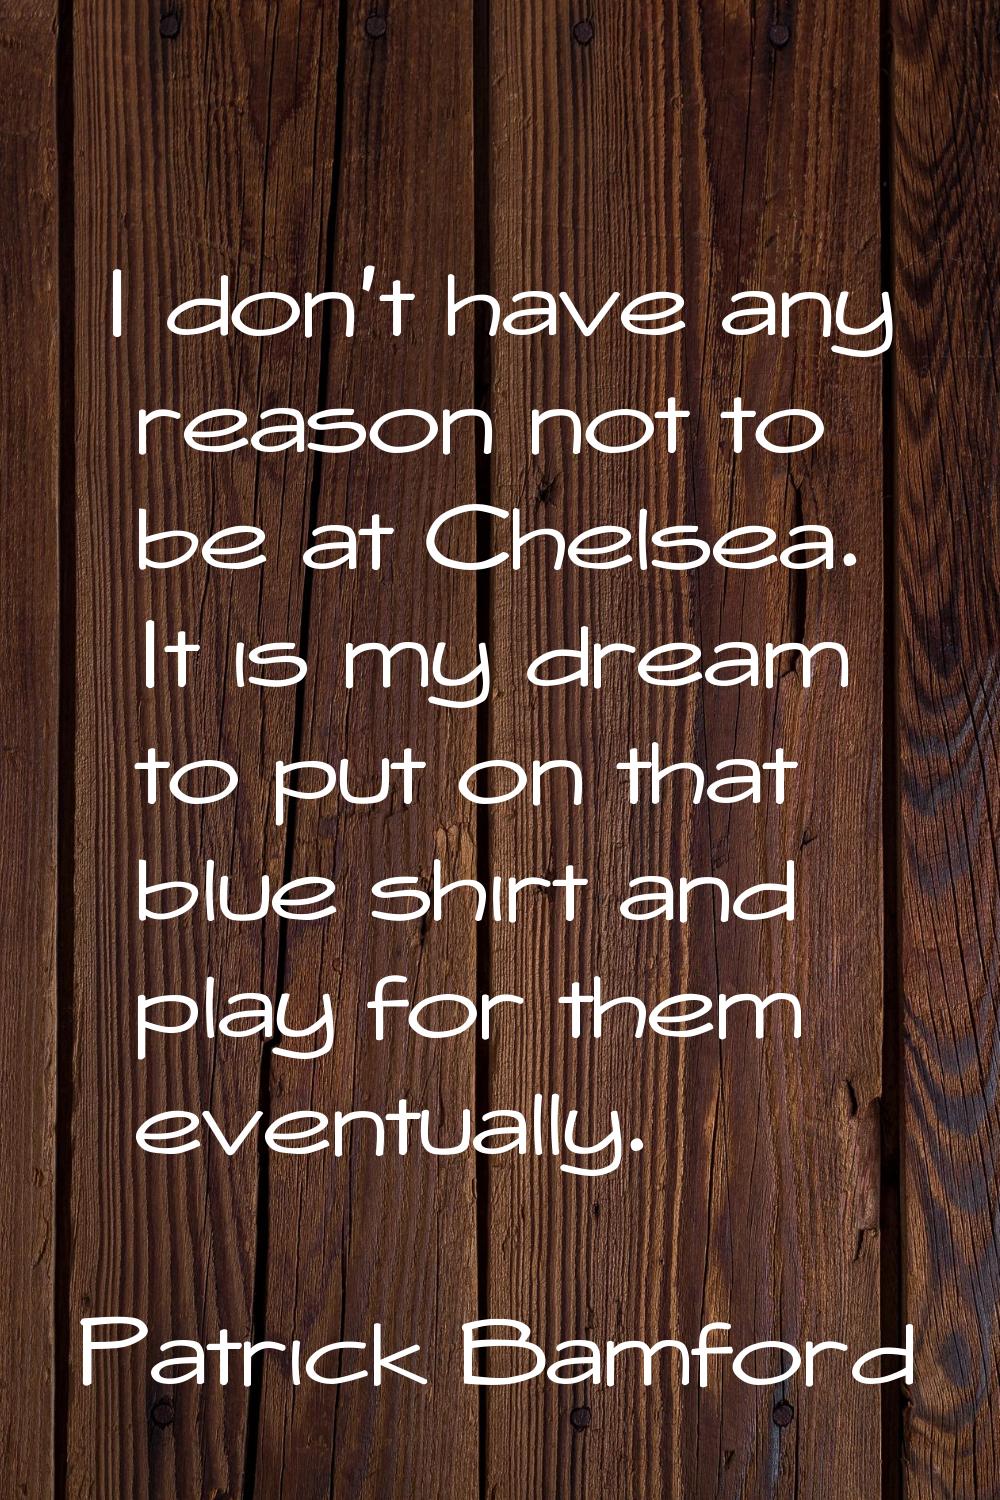 I don't have any reason not to be at Chelsea. It is my dream to put on that blue shirt and play for